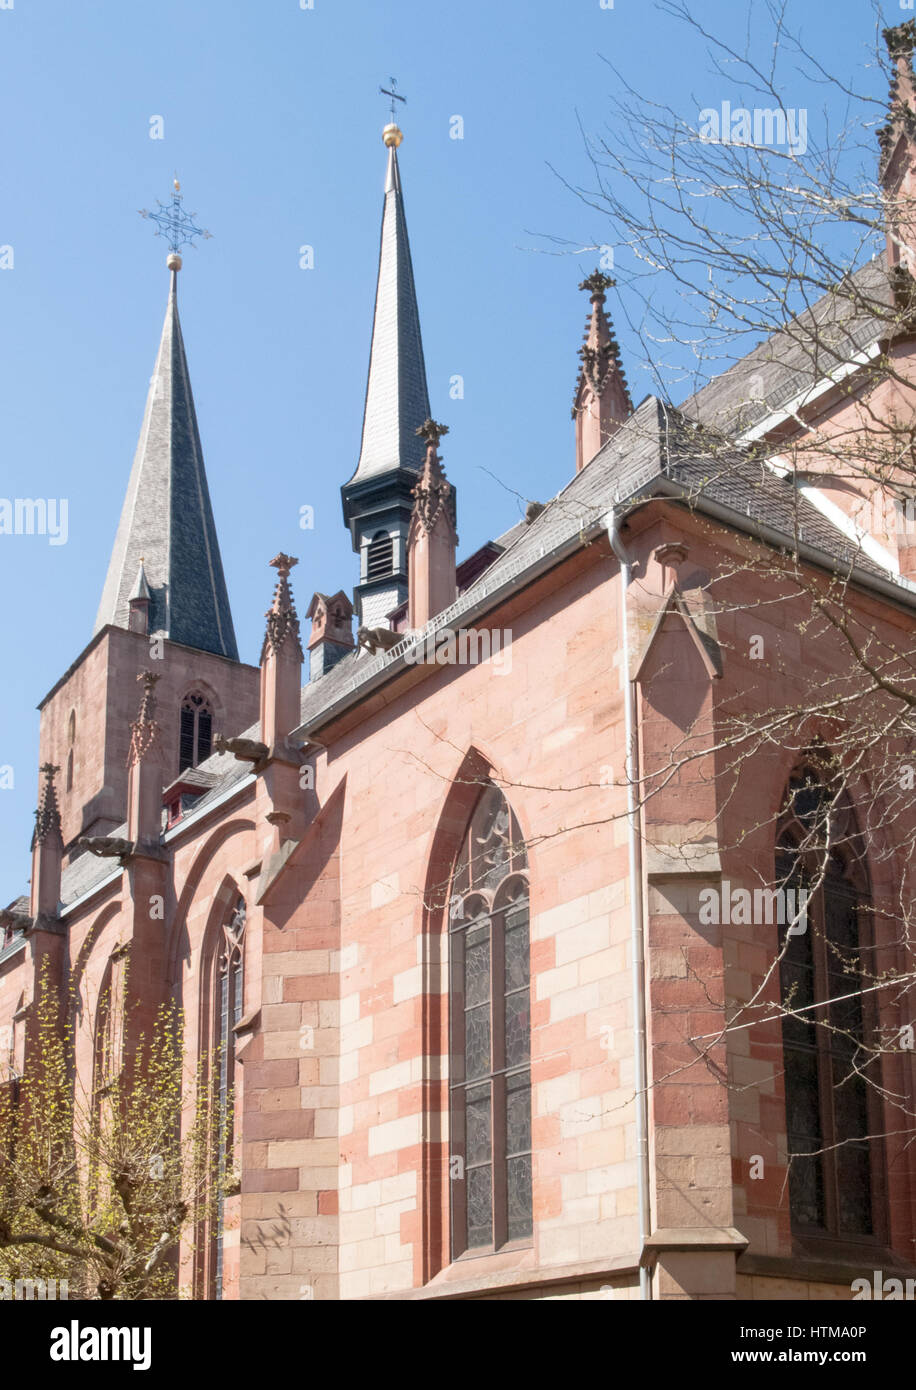 Neustadt an der Weinstrasse, Germany - April 19, 2015: Spiers on the roof of Stiftskirche Stock Photo